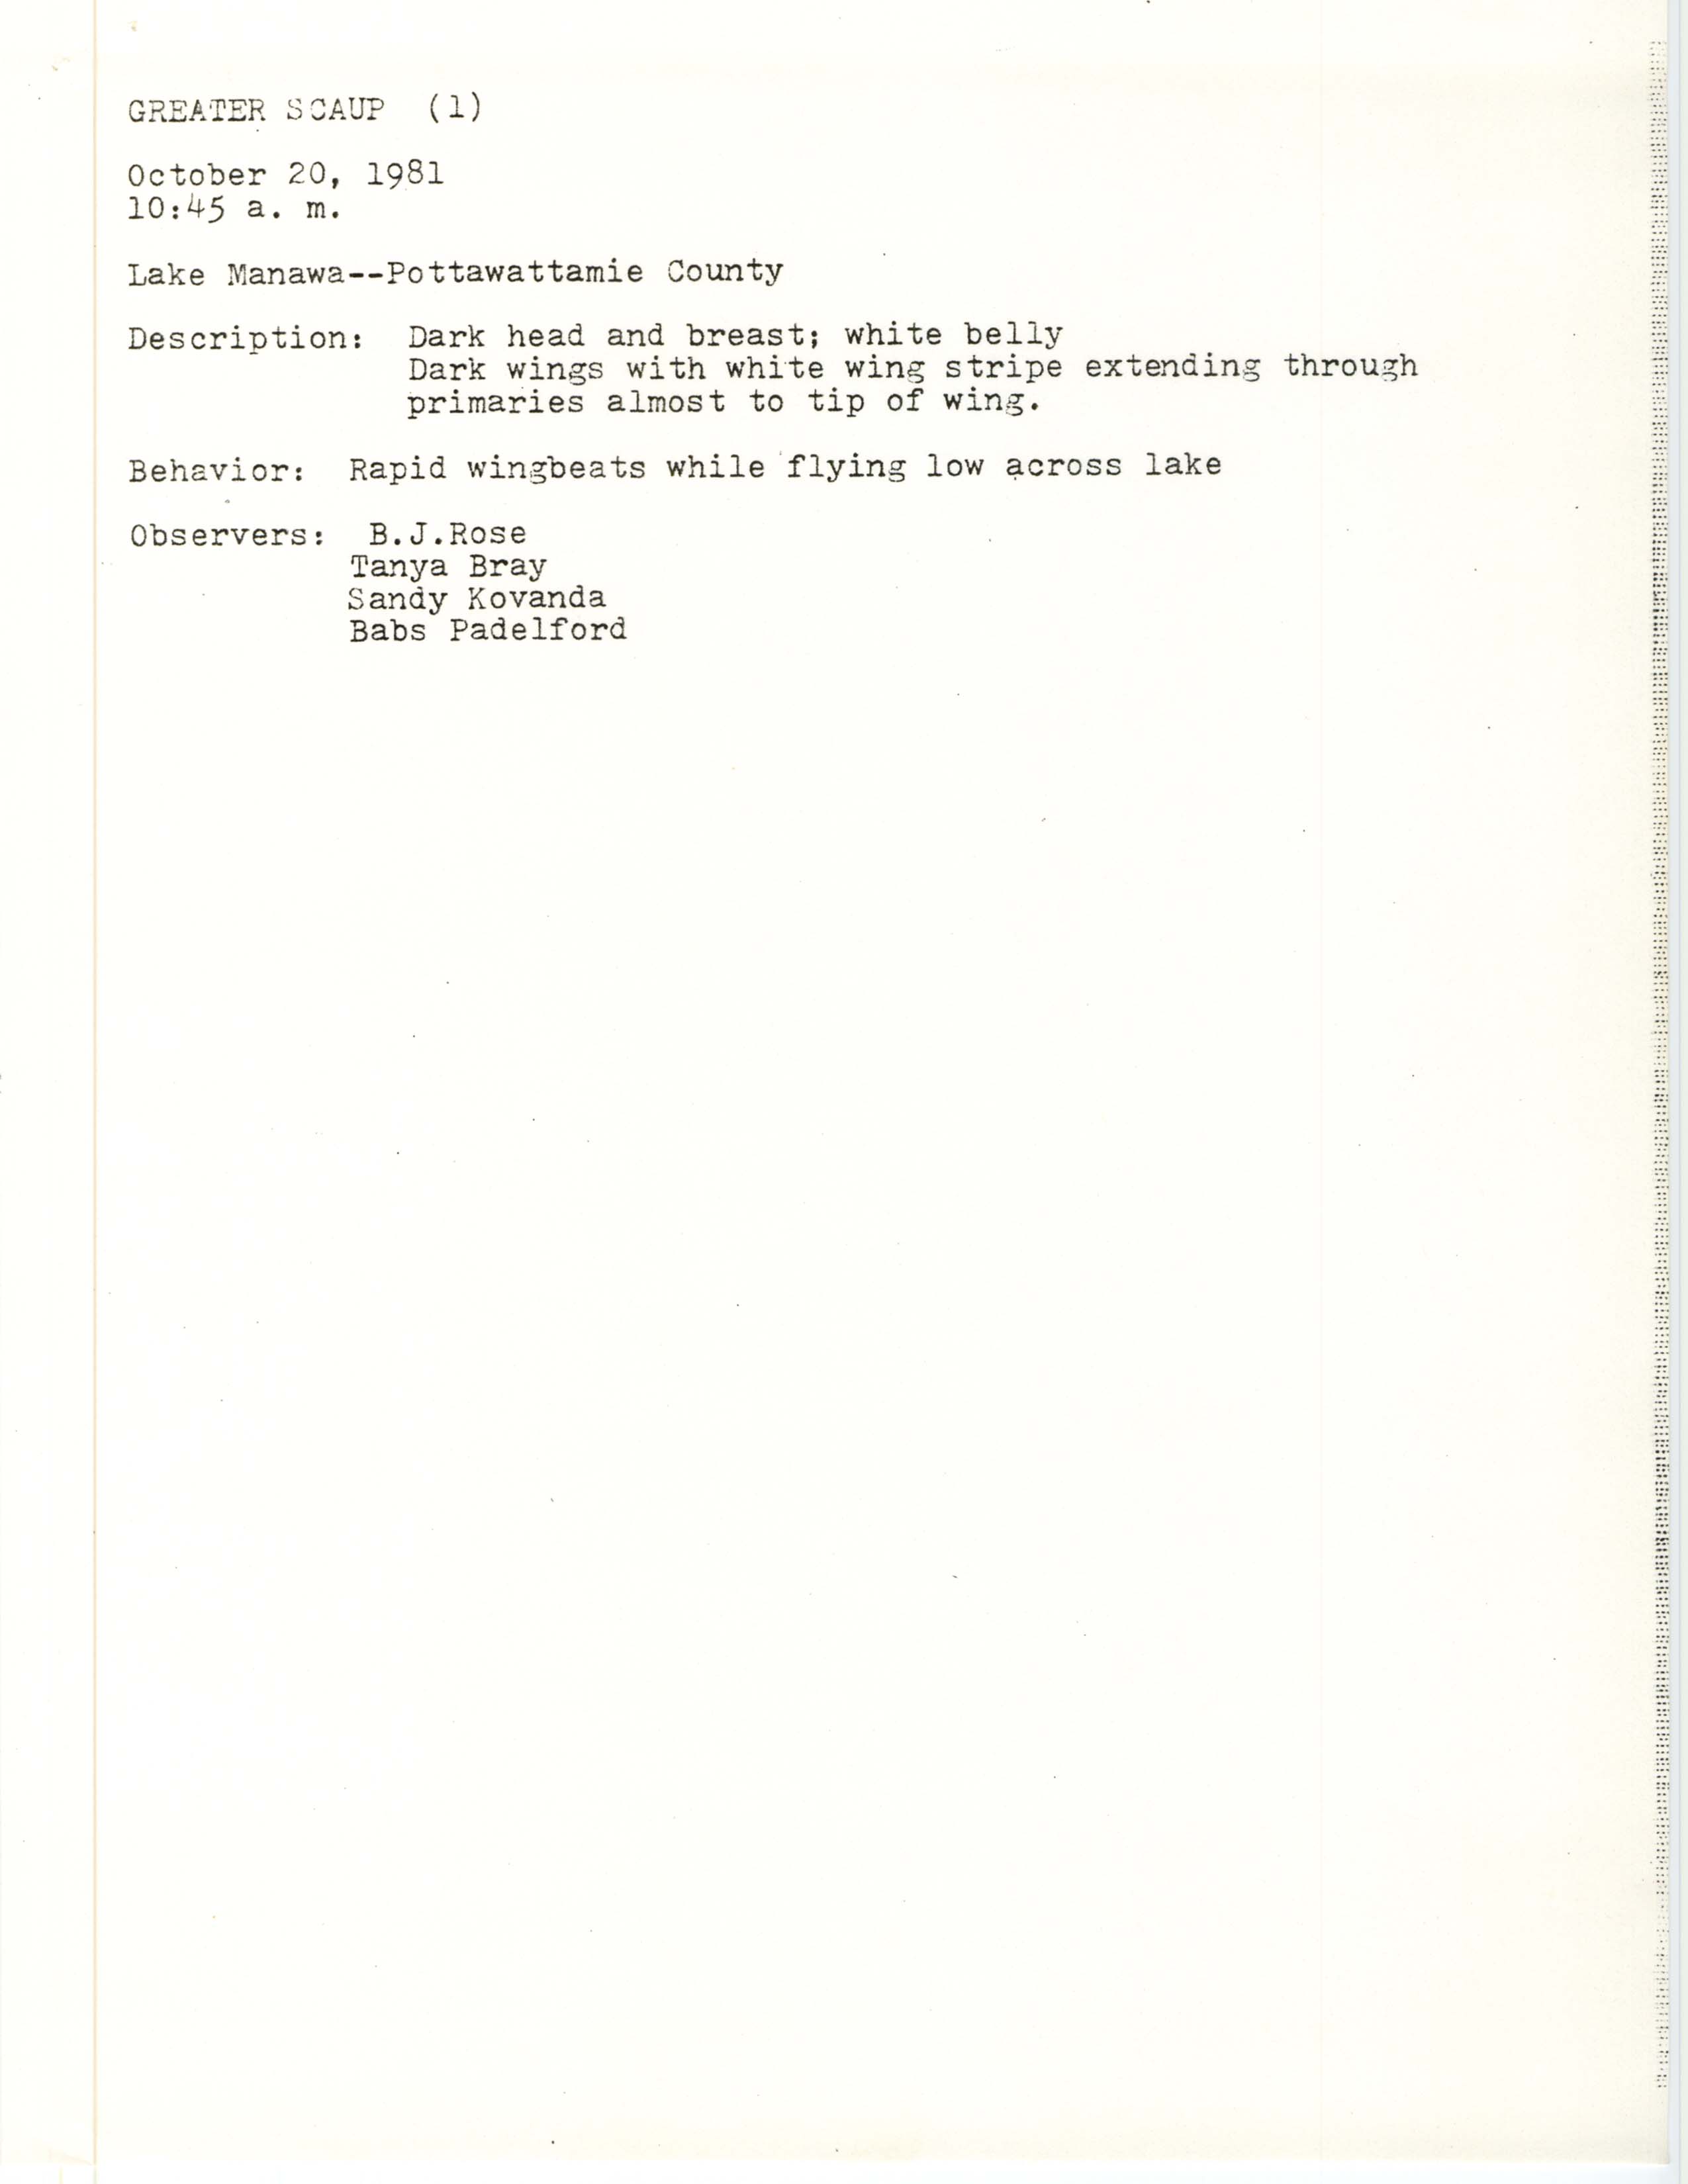 Rare bird documentation form for Greater Scaup at Lake Manawa in 1981